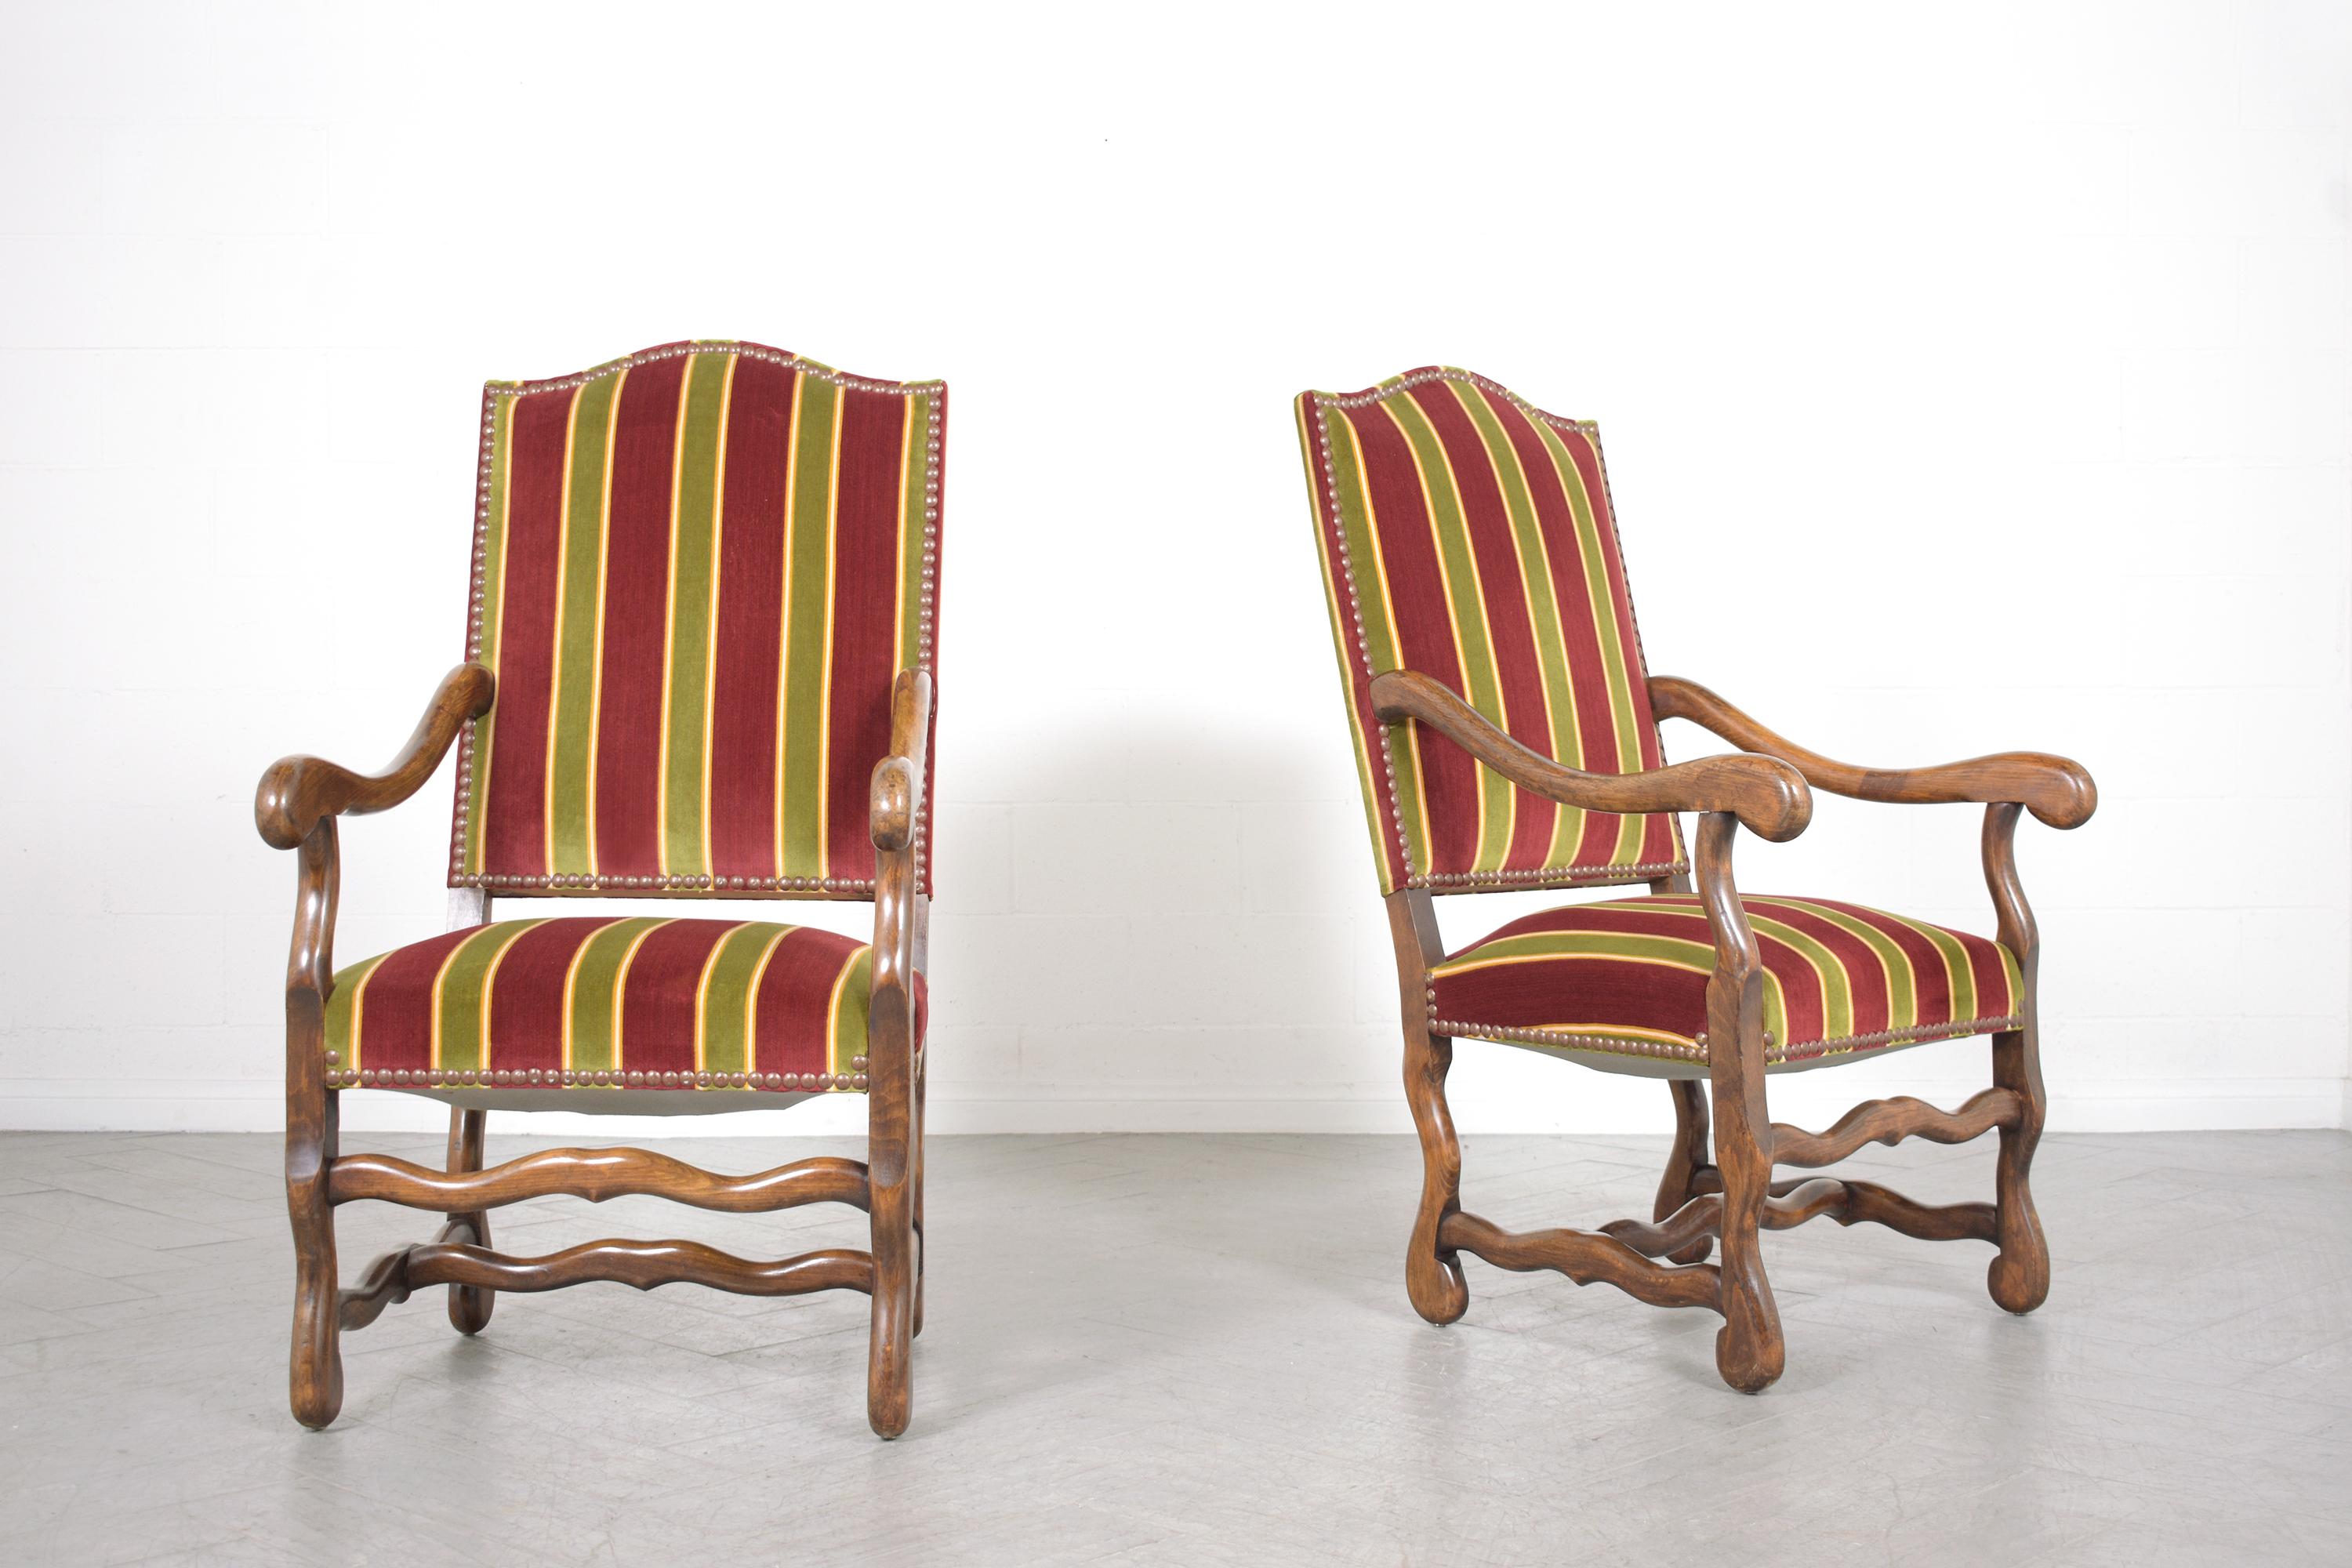 Step into the grandeur of the late 19th century with our exquisite pair of French armchairs, meticulously handcrafted from solid wood. Each chair, reflecting exceptional craftsmanship, stands proudly in great condition, having been thoroughly